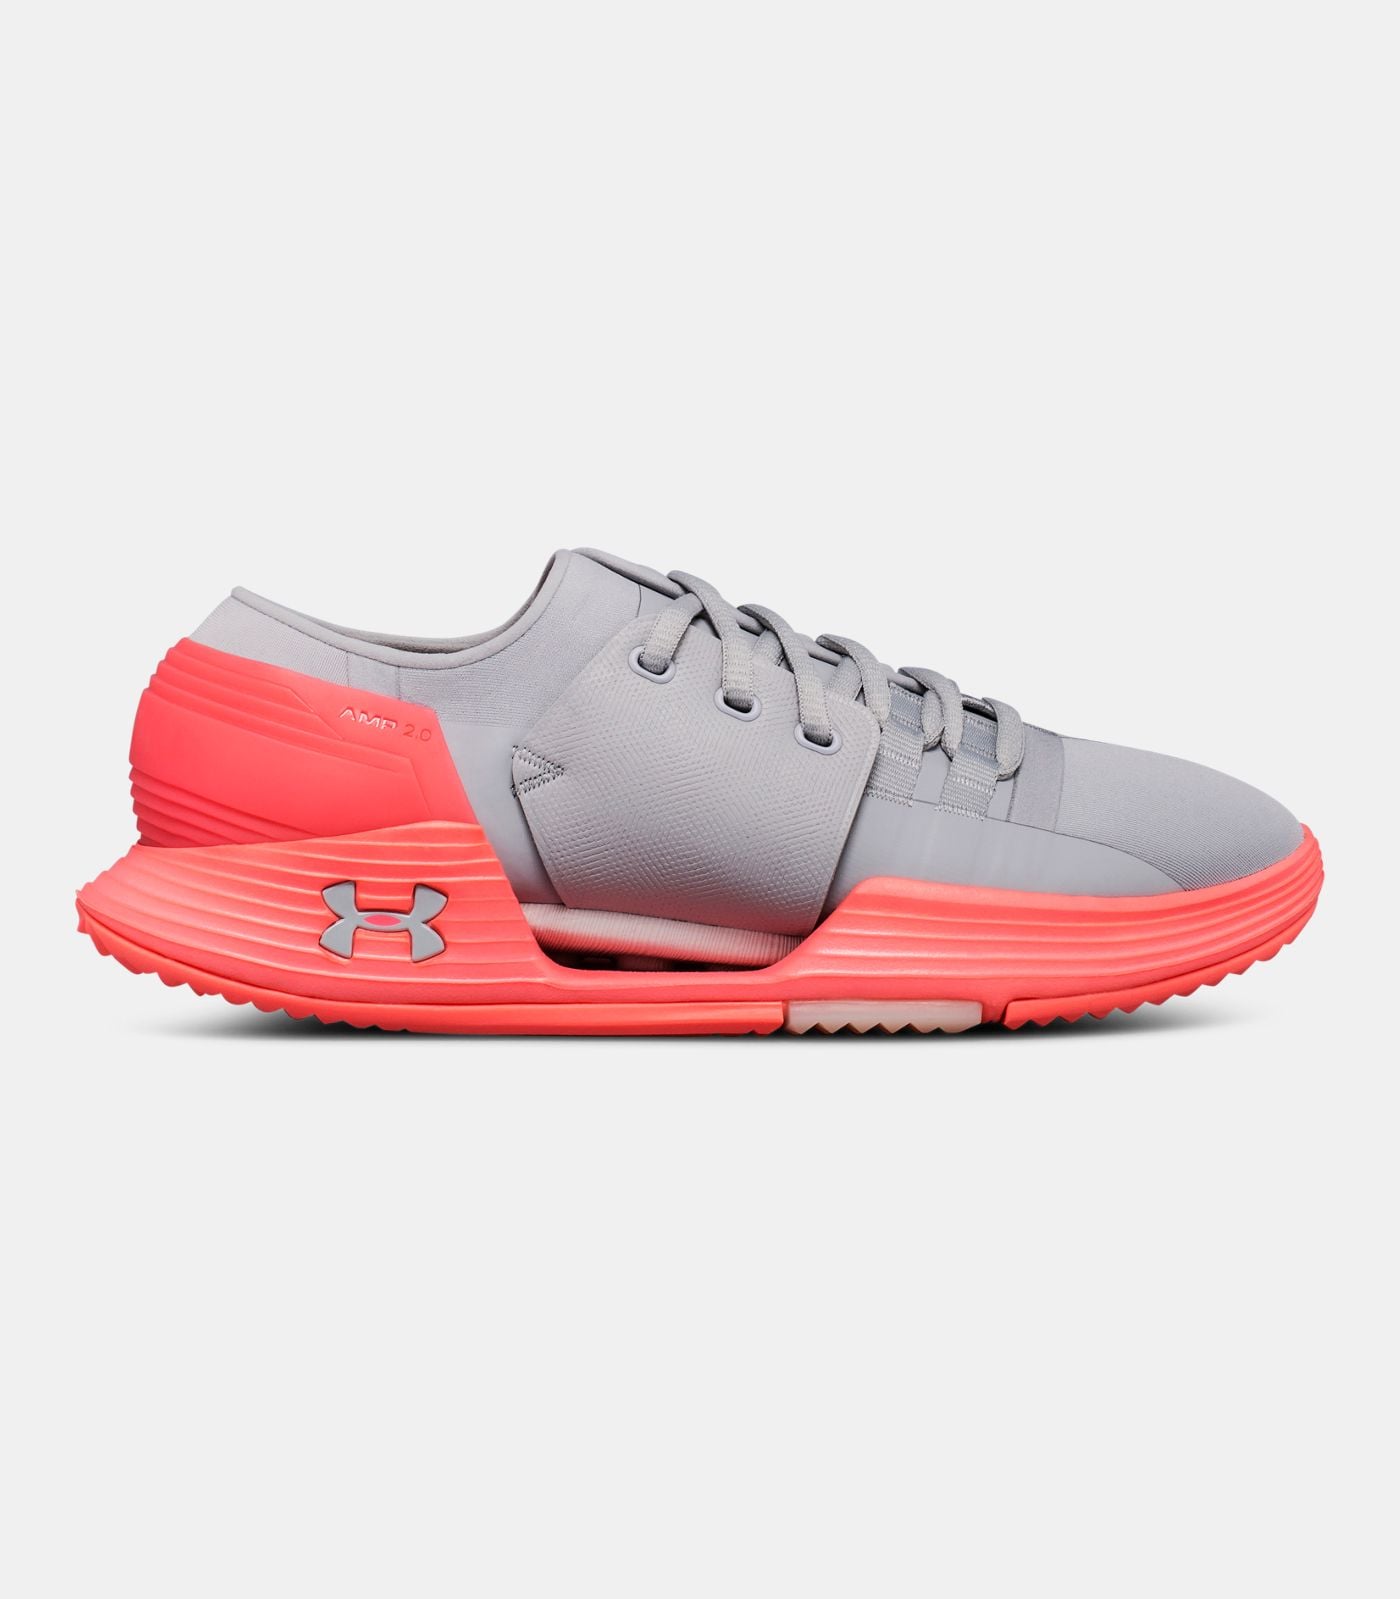 Buy > under armour essential sportstyle shoes > in stock